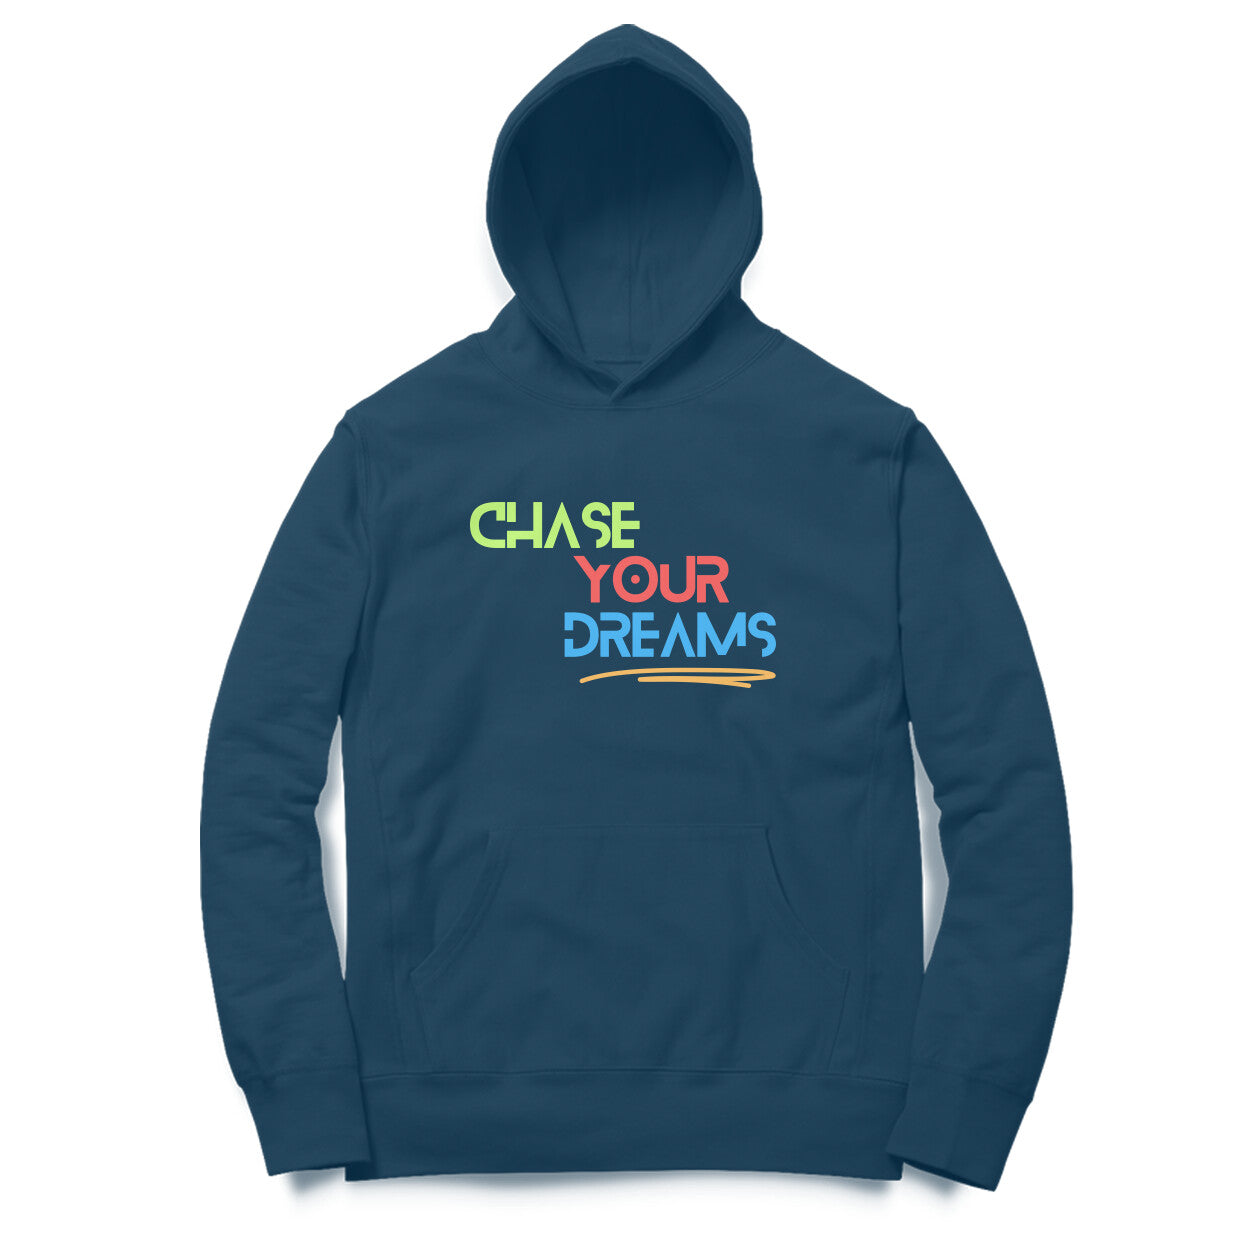 Chase Your Dreams - Navy Blue Unisex Hoodie